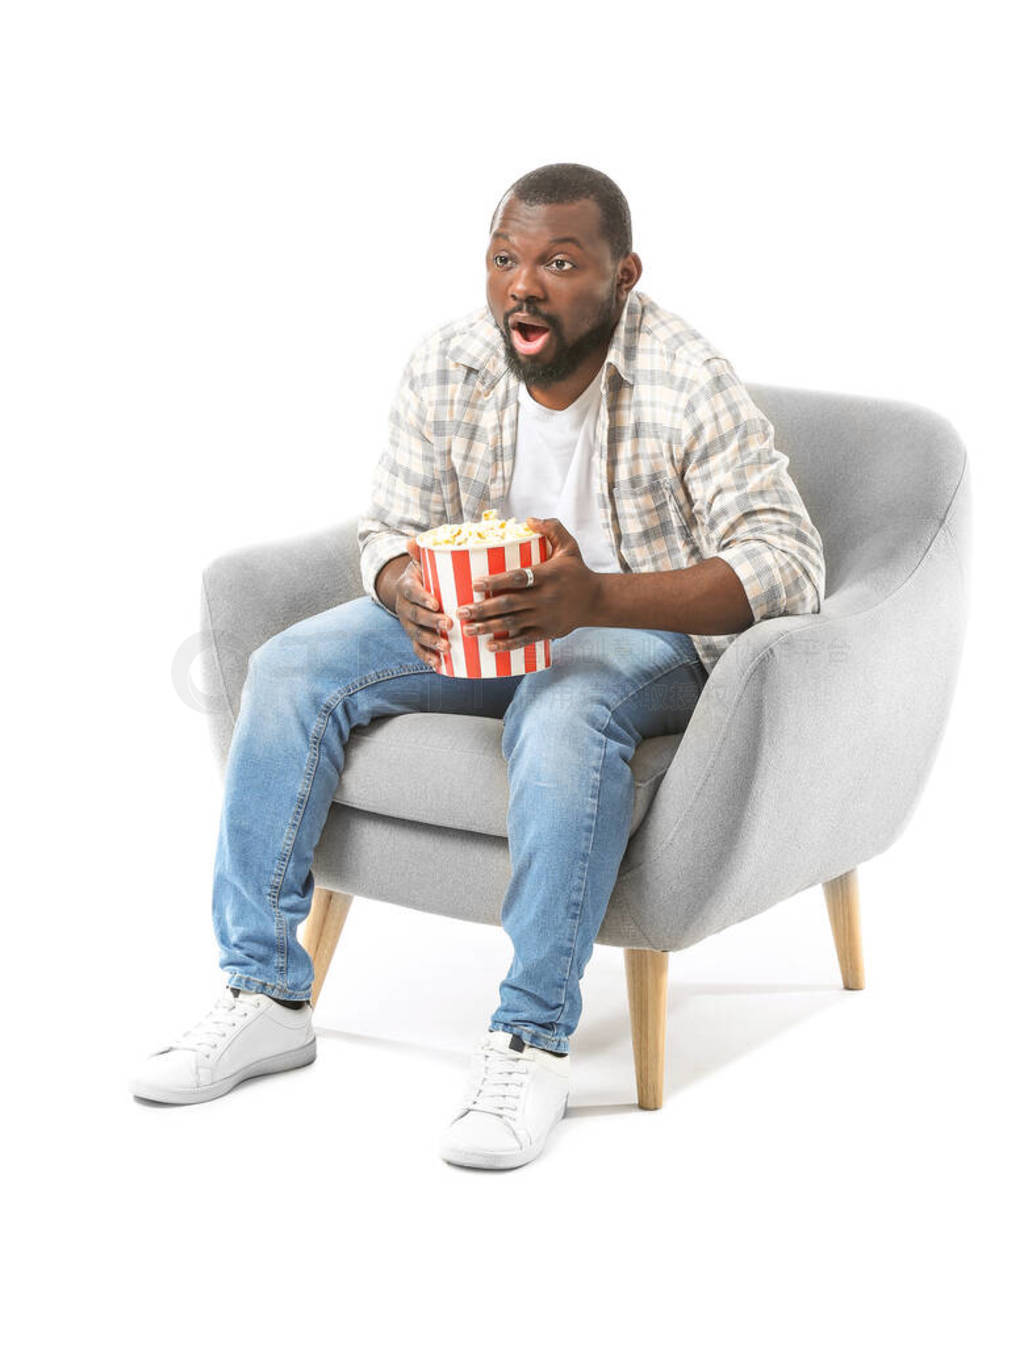 Emotional African-American man with popcorn watching TV while si